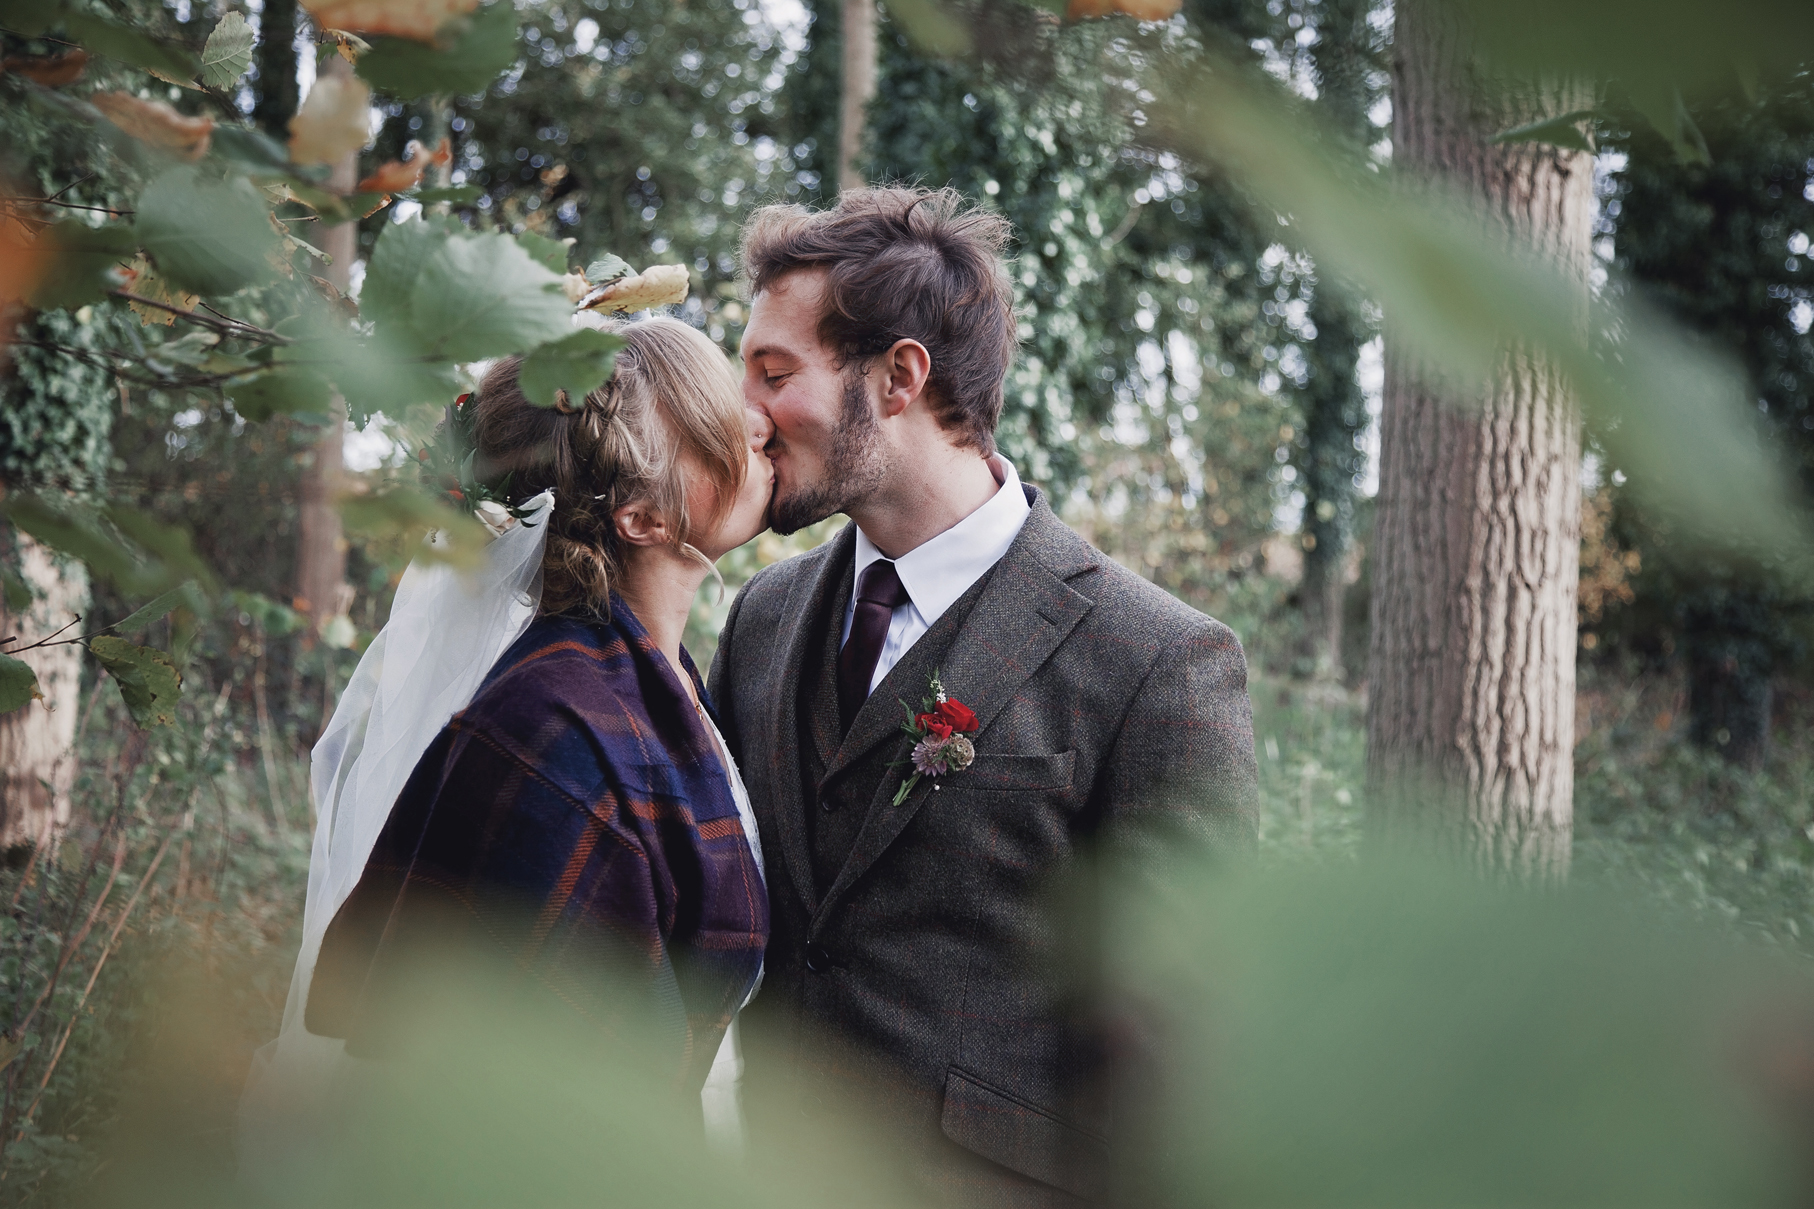 Ollie and Emily's Rustic DIY, Intimate Autumnal Wedding Day